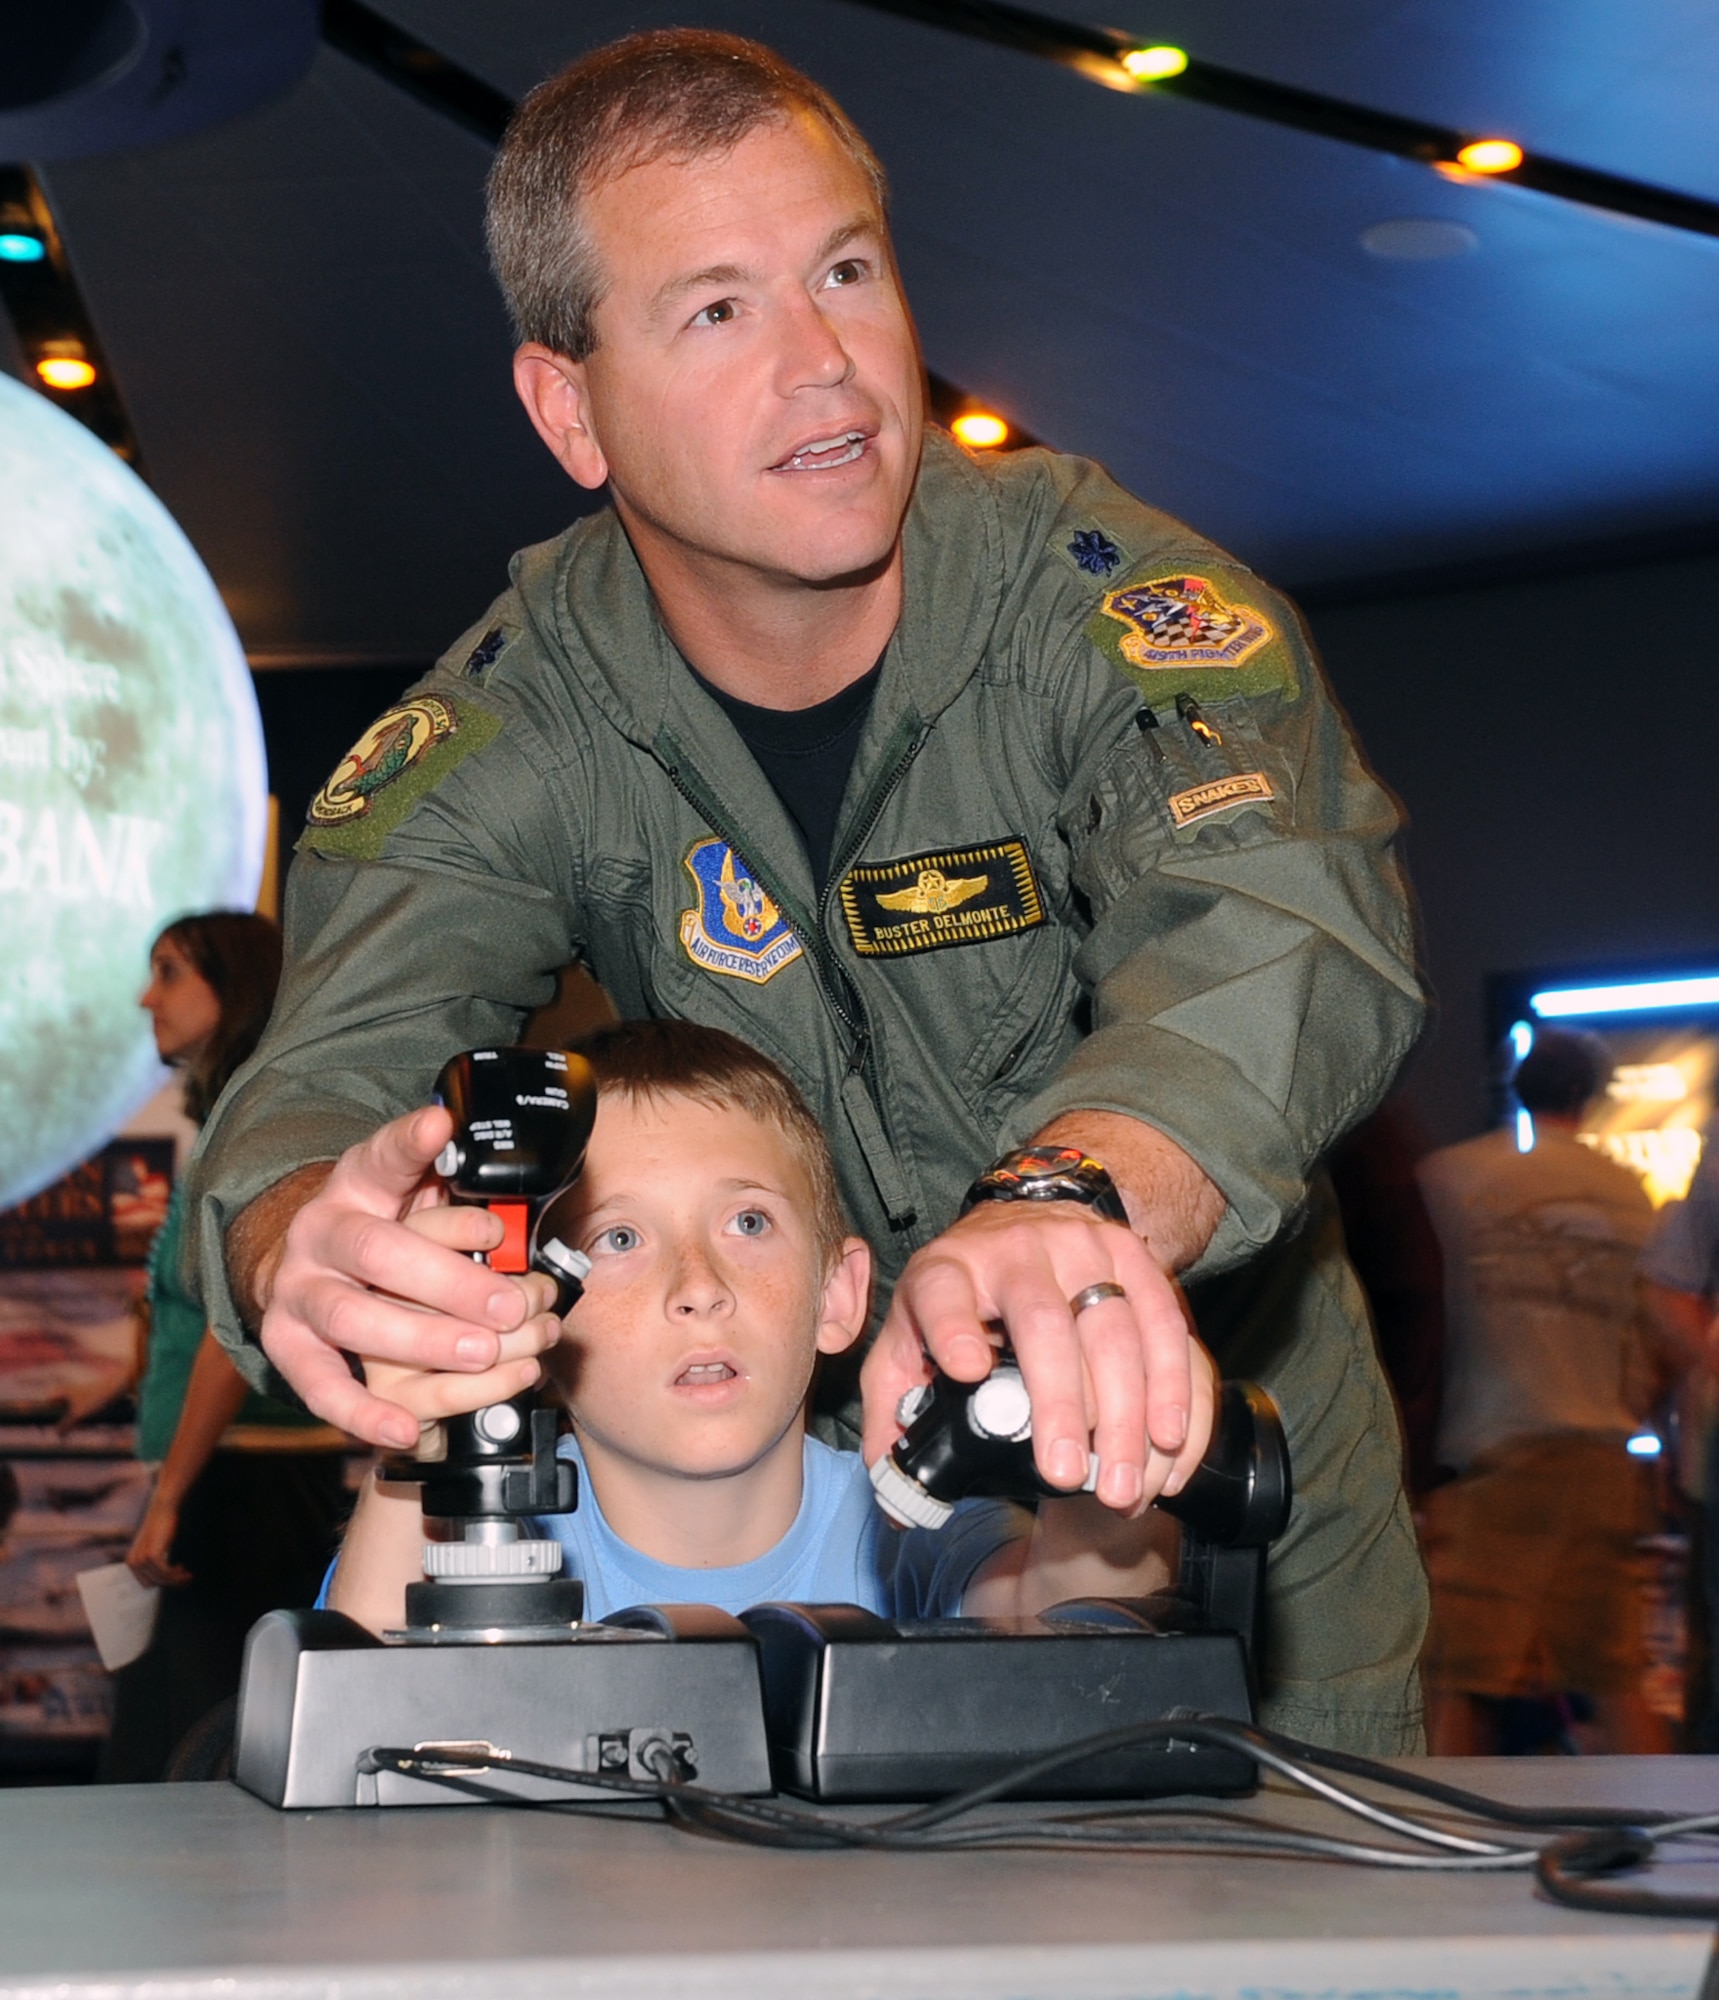 Pilot in training, Cooper Hirst of Ogden Utah, gets a little help with the
controls of a Flight Simulator from 466th Fighter Squadron pilot, Lt. Col.
Buster Delmonte, before the showing of the IMAX movie "Fighter Pilot:
Operation Red Flag" at the Clark Planetarium in Salt Lake City during Air
Force Week Salt Lake City on June 2. (U.S. Air Force photo by Alex R. Lloyd)
